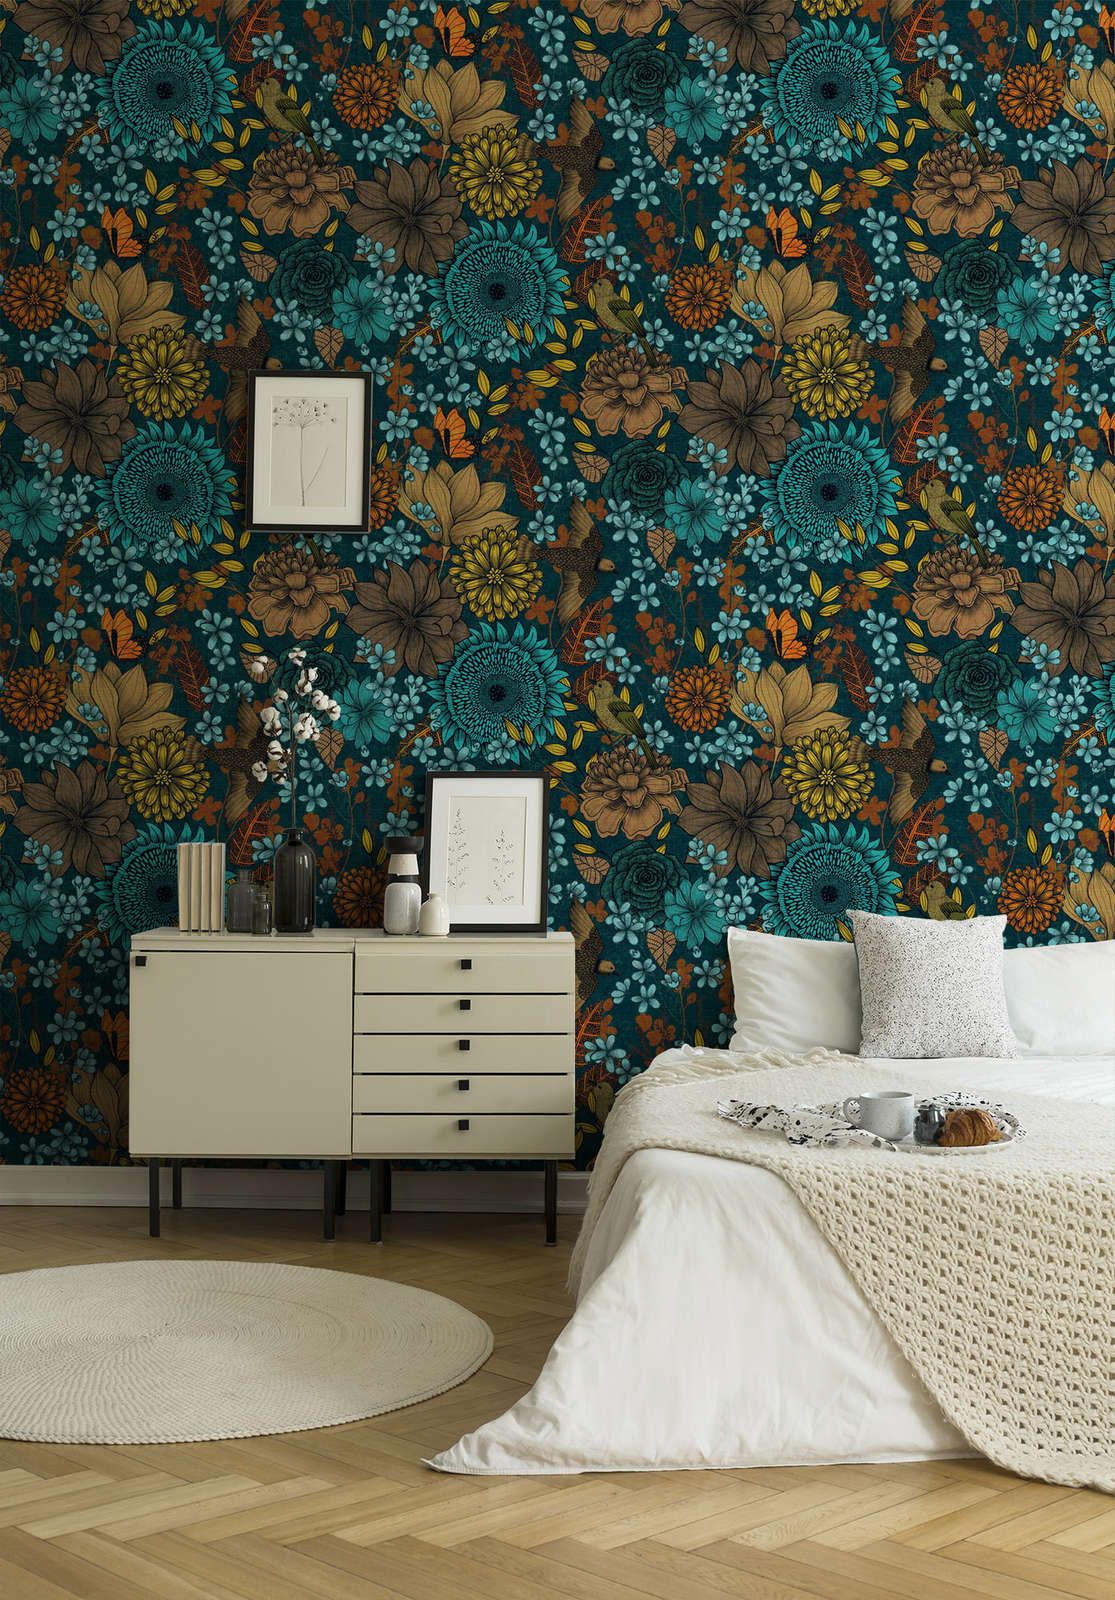             Colourful non-woven wallpaper with large floral pattern with flowers & leaves - blue, beige, brown
        